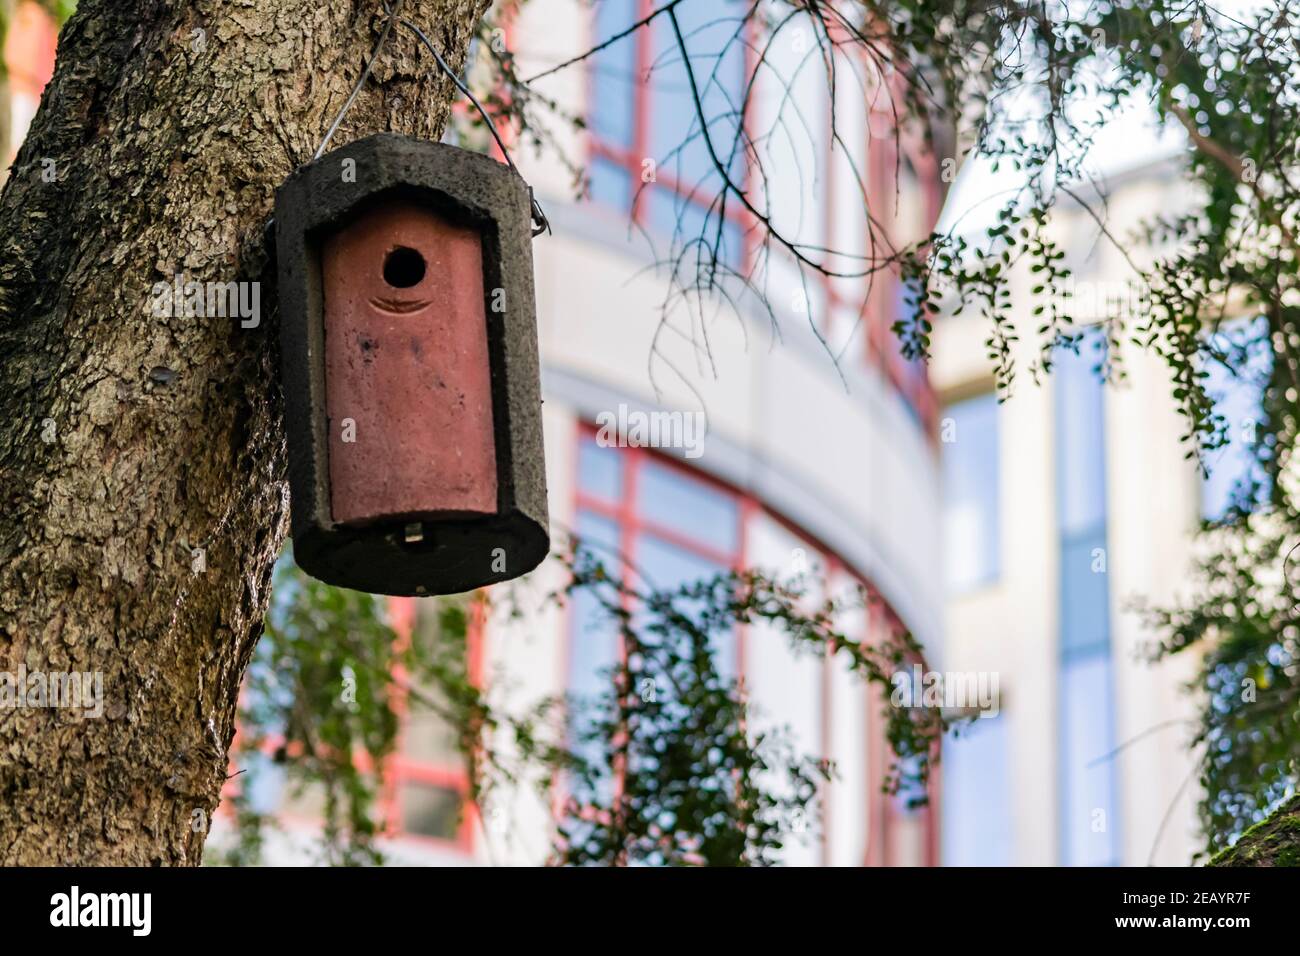 Handmade birdhouse hanging on a tree in brown and red colors, cylindrical shape or bird house with tiny hole for entrance in the middle, blurred Stock Photo